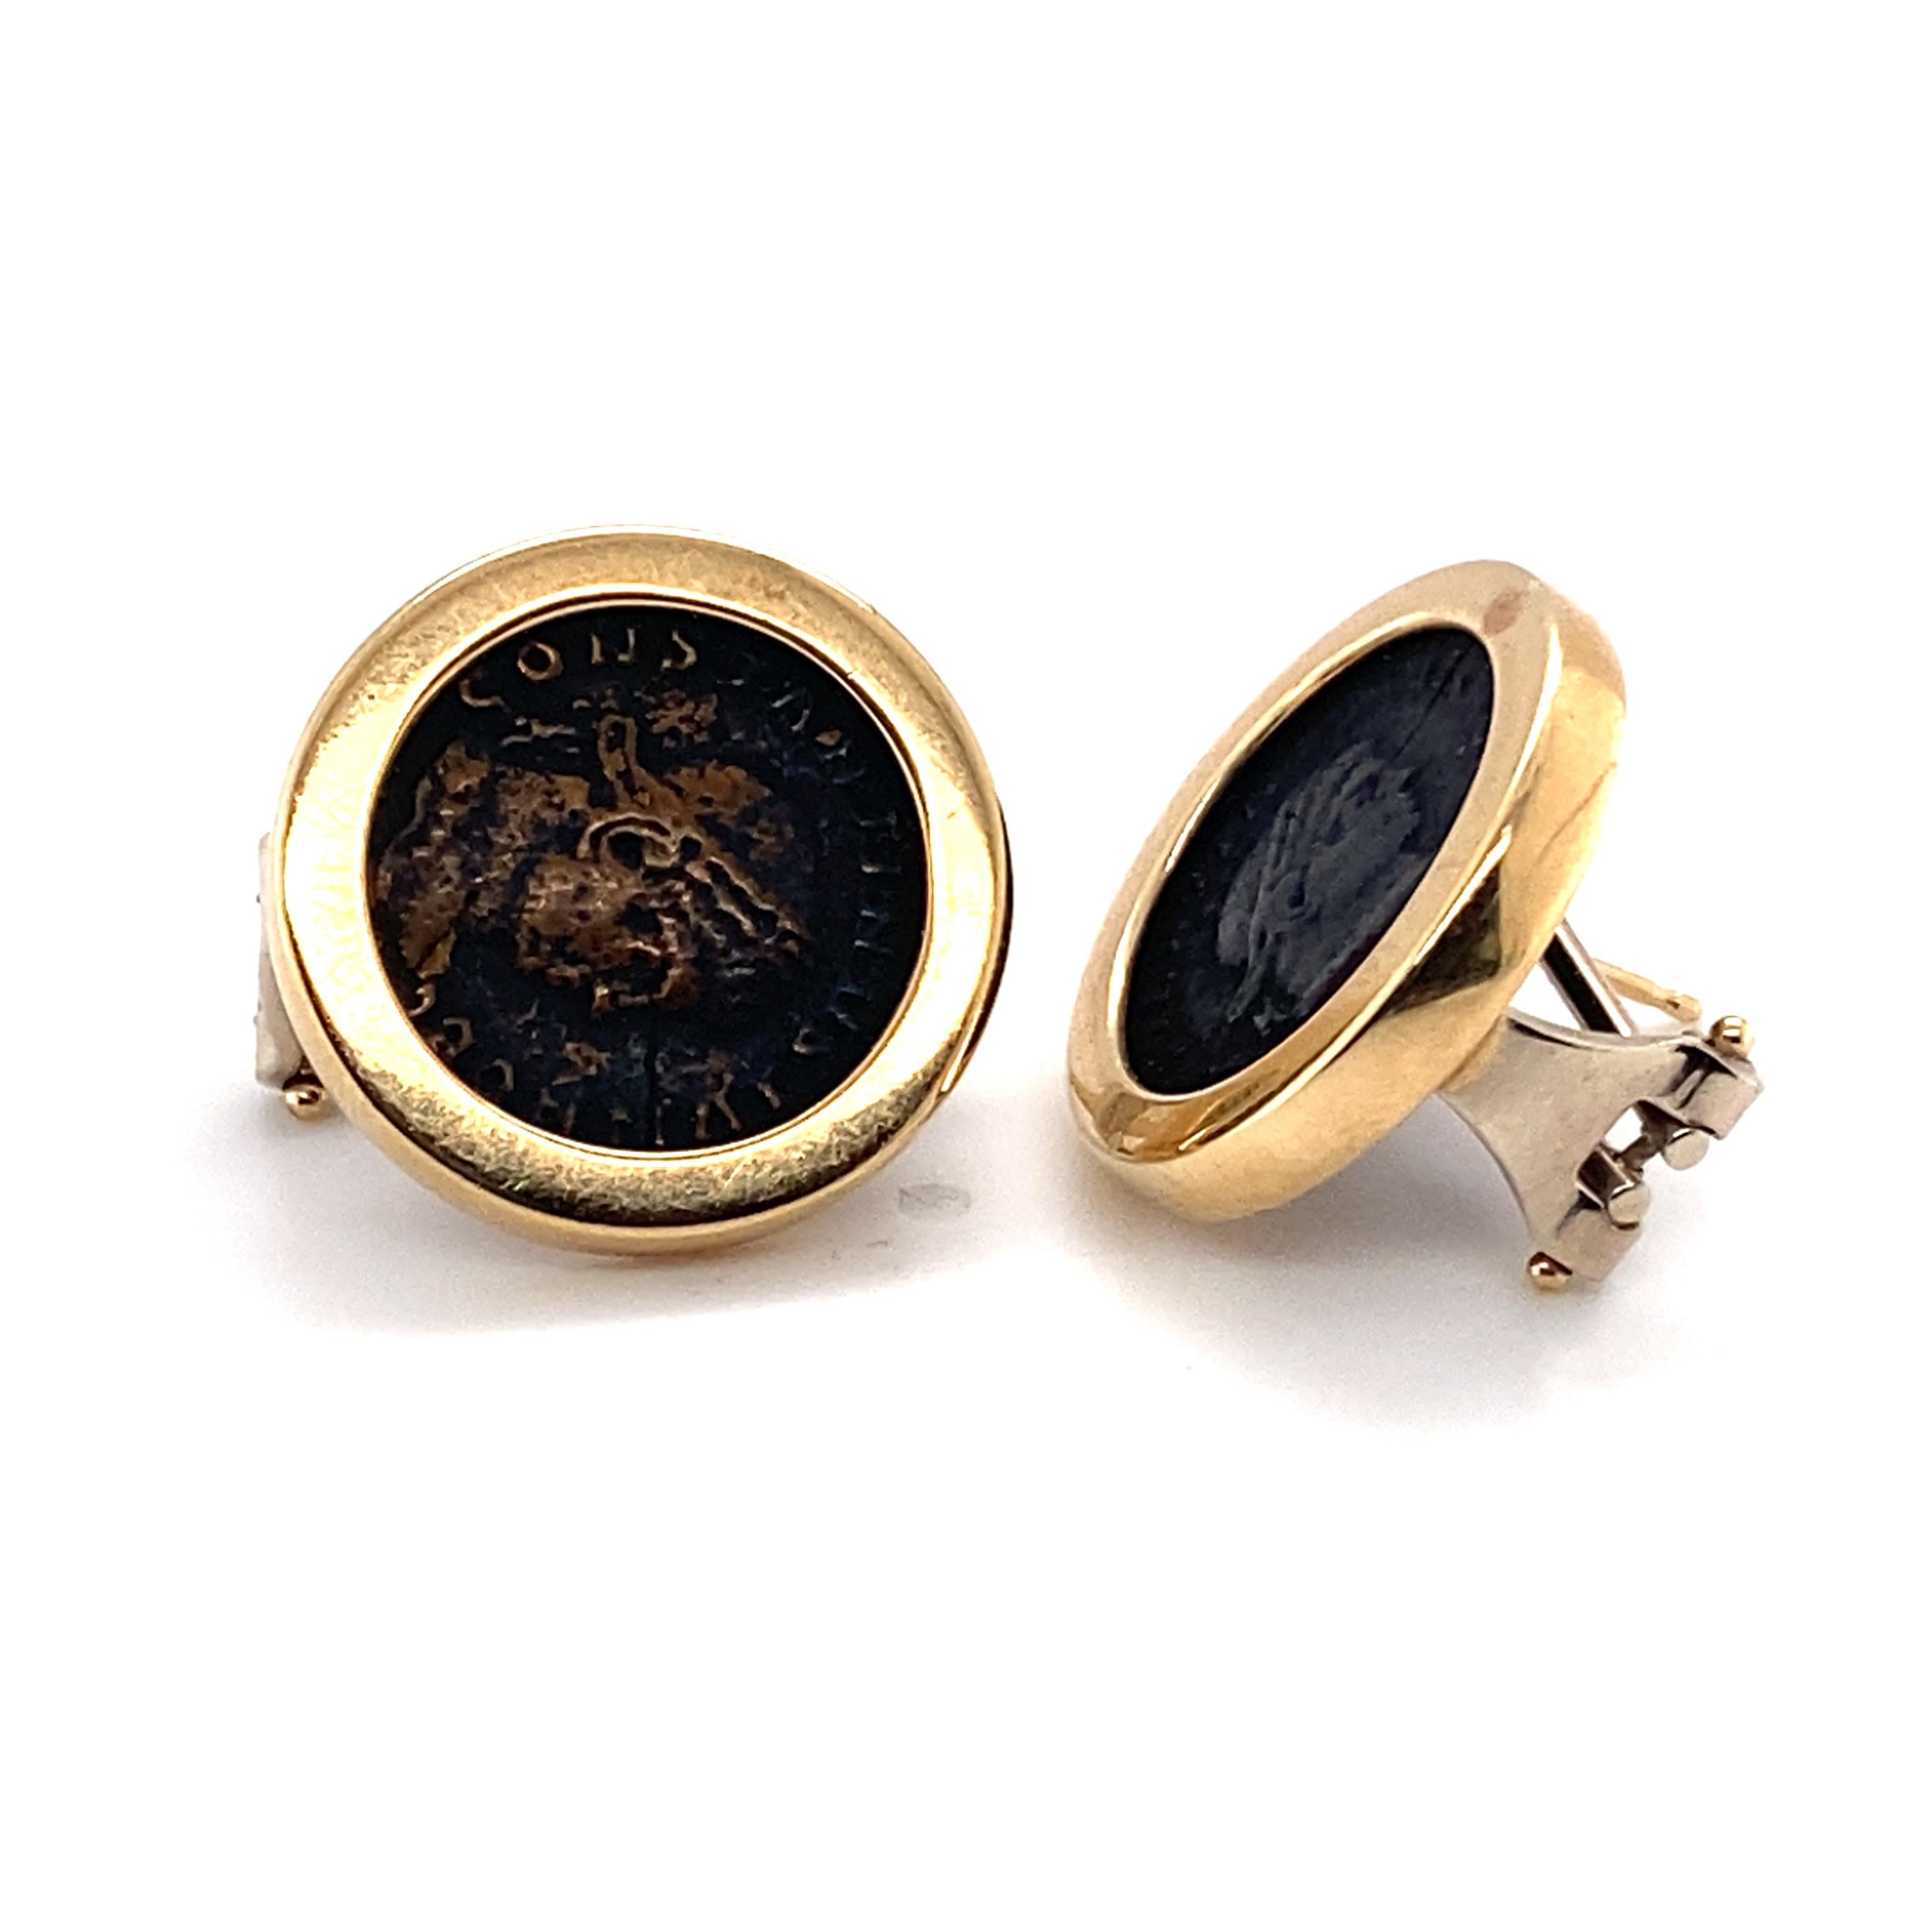 Item Details: 
Metal: 14 Karat Yellow Gold 
Weight: 12.4 grams
Measurements: .75 inches x .75 inches 
Hallmark: 14 Karat Italy

Item Features: 
These beautiful classic roman earrings have an antique coin look that are most likely to be bronzed.